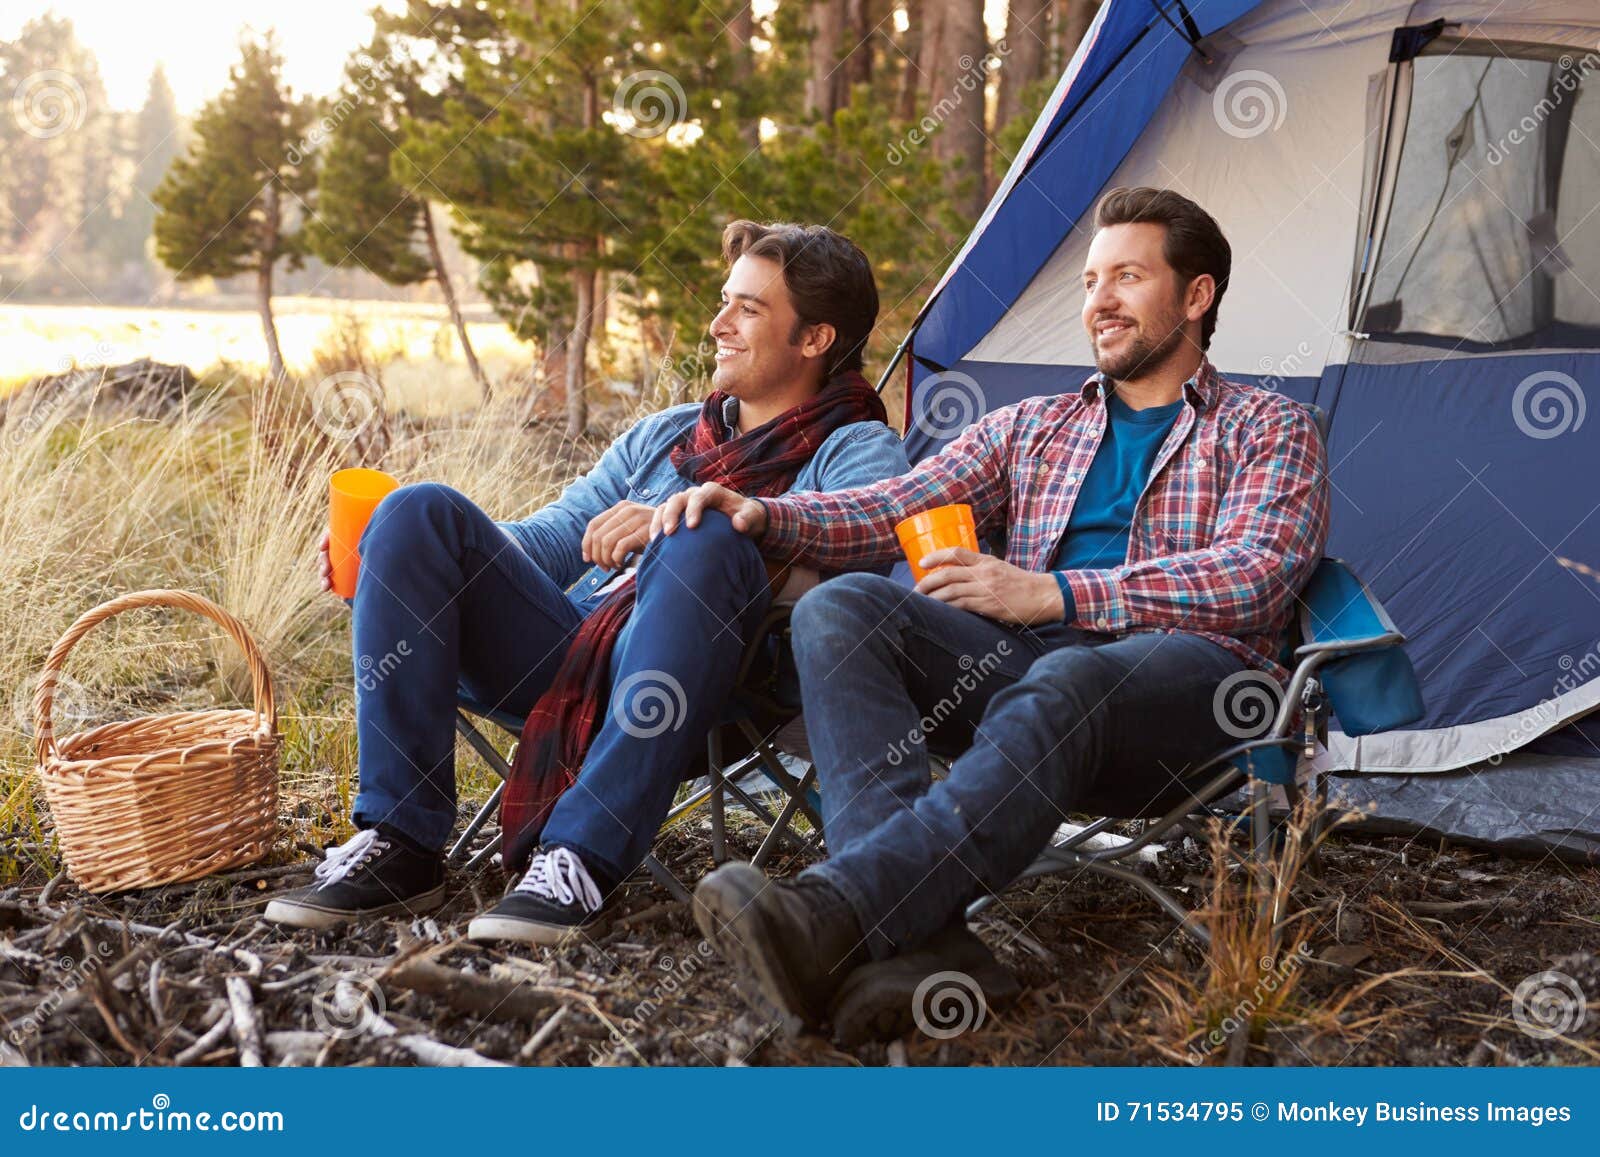 Male Gay Couple on Autumn Camping Trip Stock Image pic